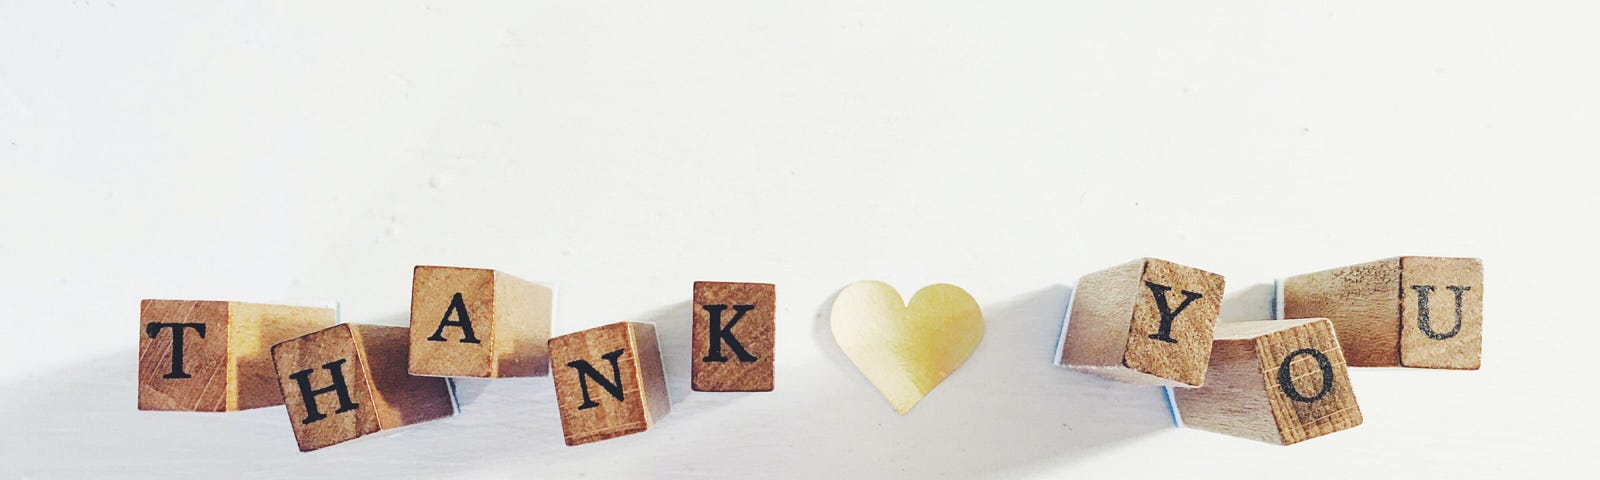 Wooden cubes with letters reading Thank you and a white heart in the middle